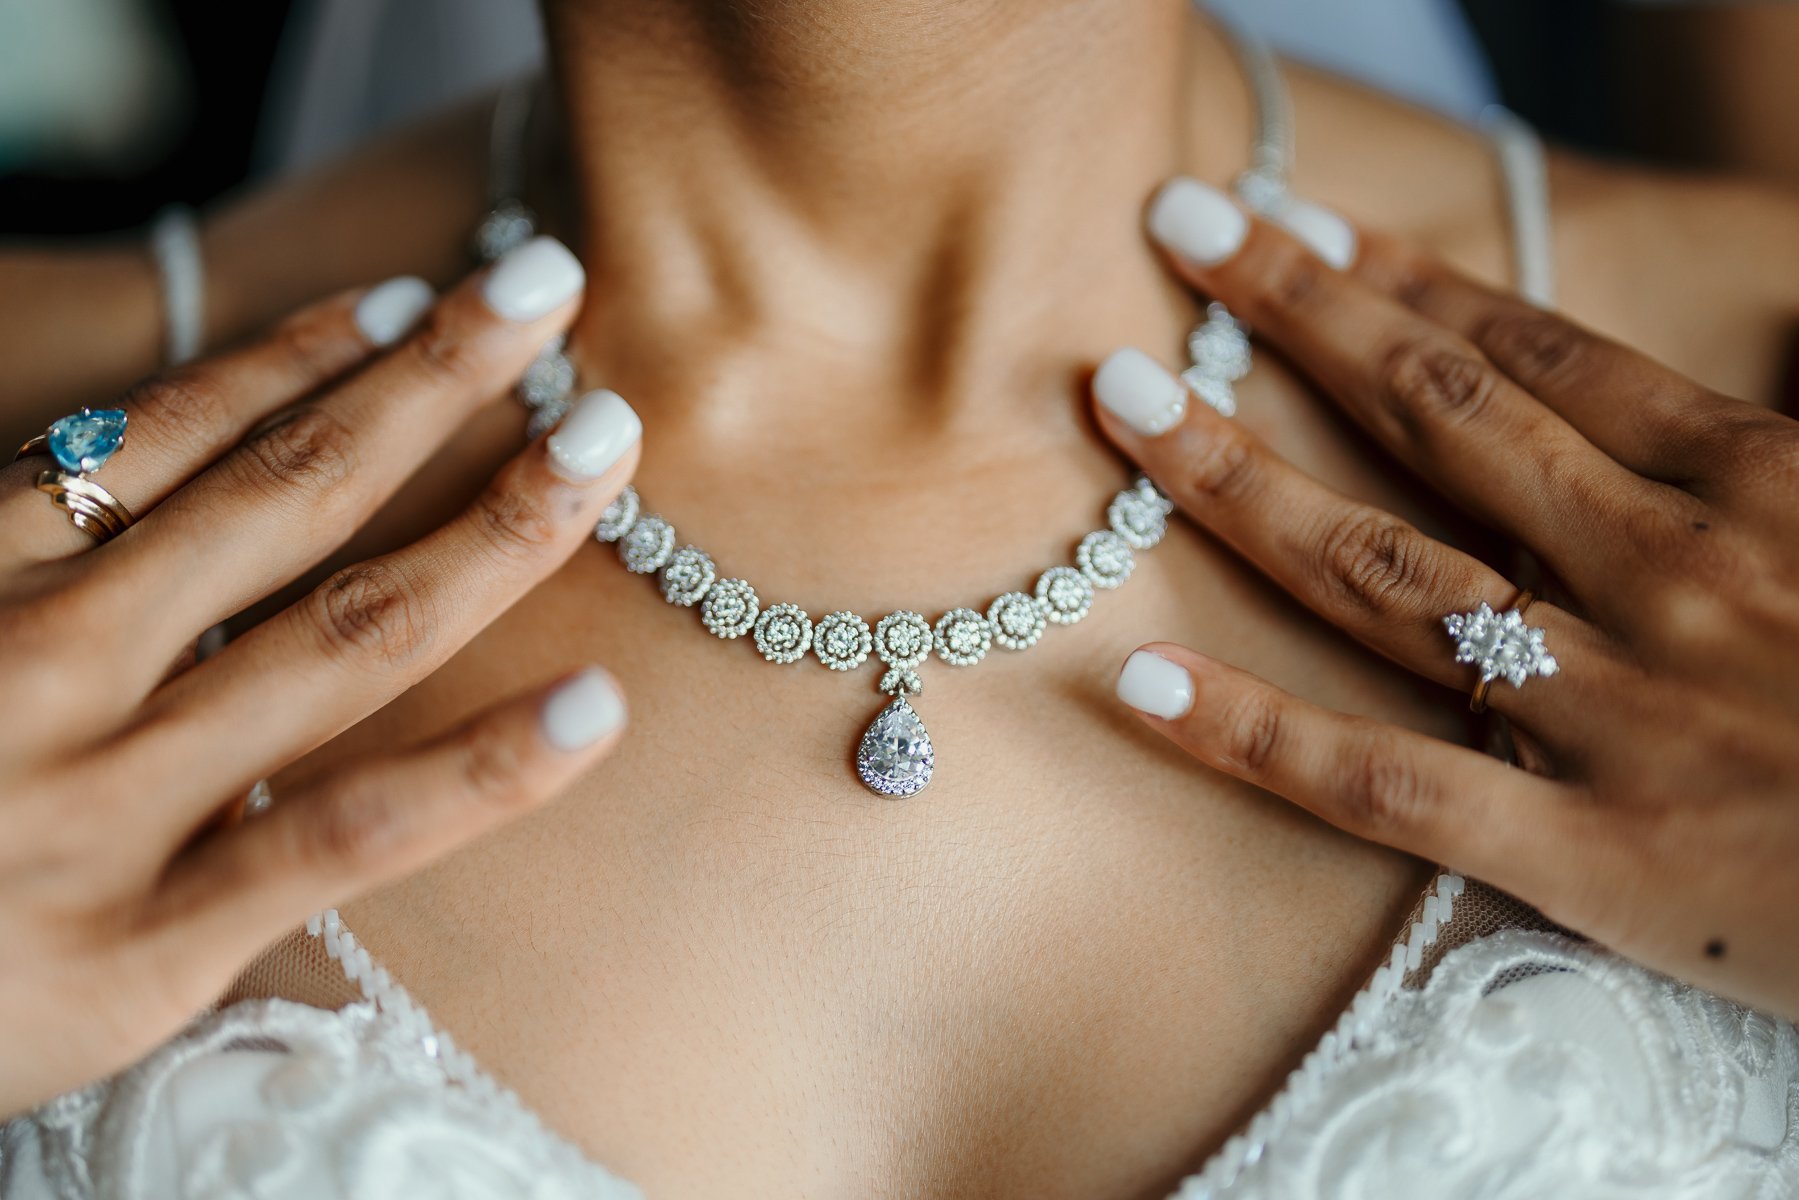    South Asian Indian bride gracefully holding her necklace, a detail photograph capturing the exquisite jewelry and the bride's elegant poise   